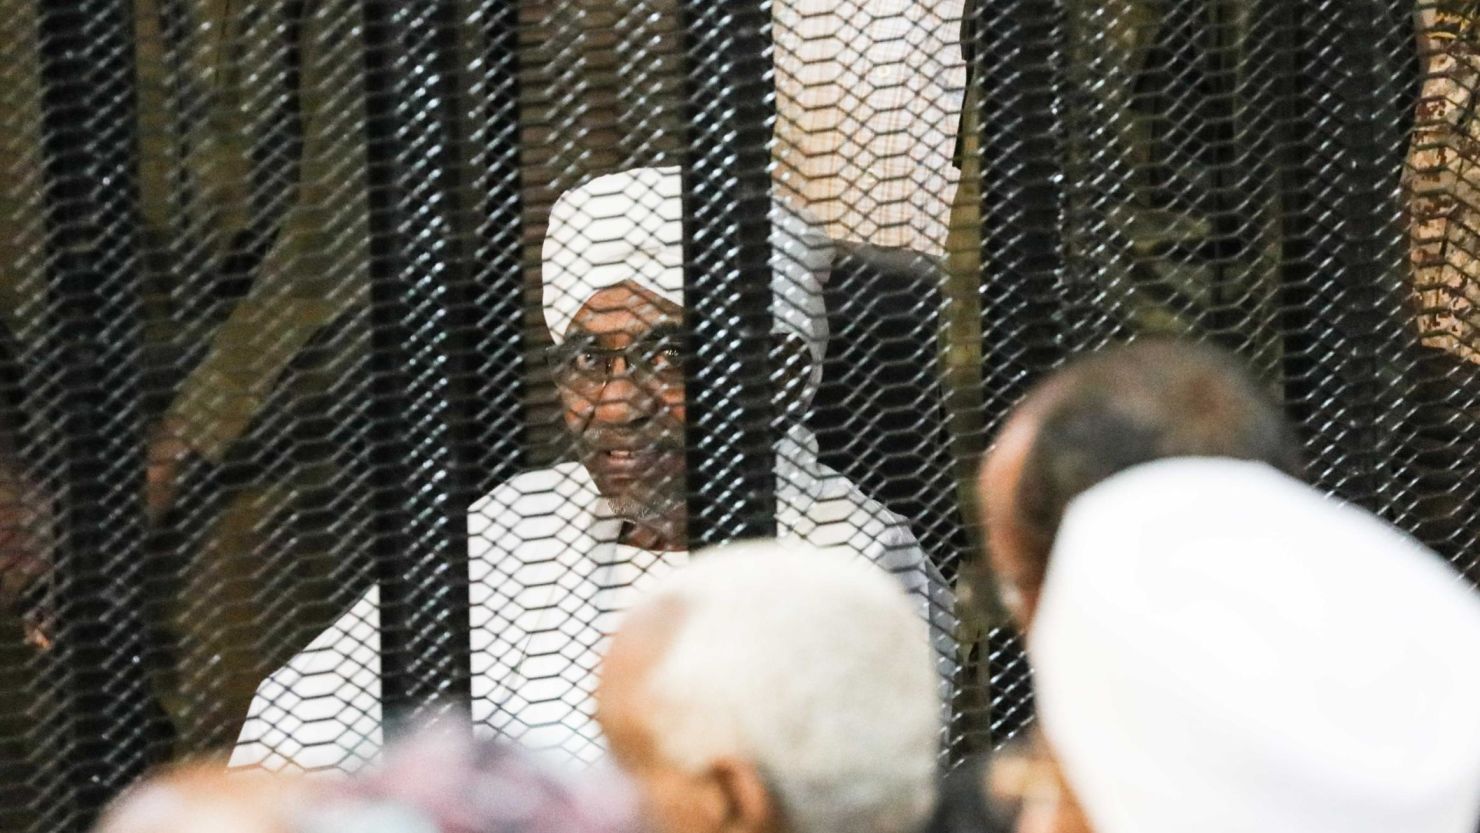 Sudan's ousted President Omar al-Bashir is seen inside the defendant's cage during his corruption trial in Khartoum on Saturday.